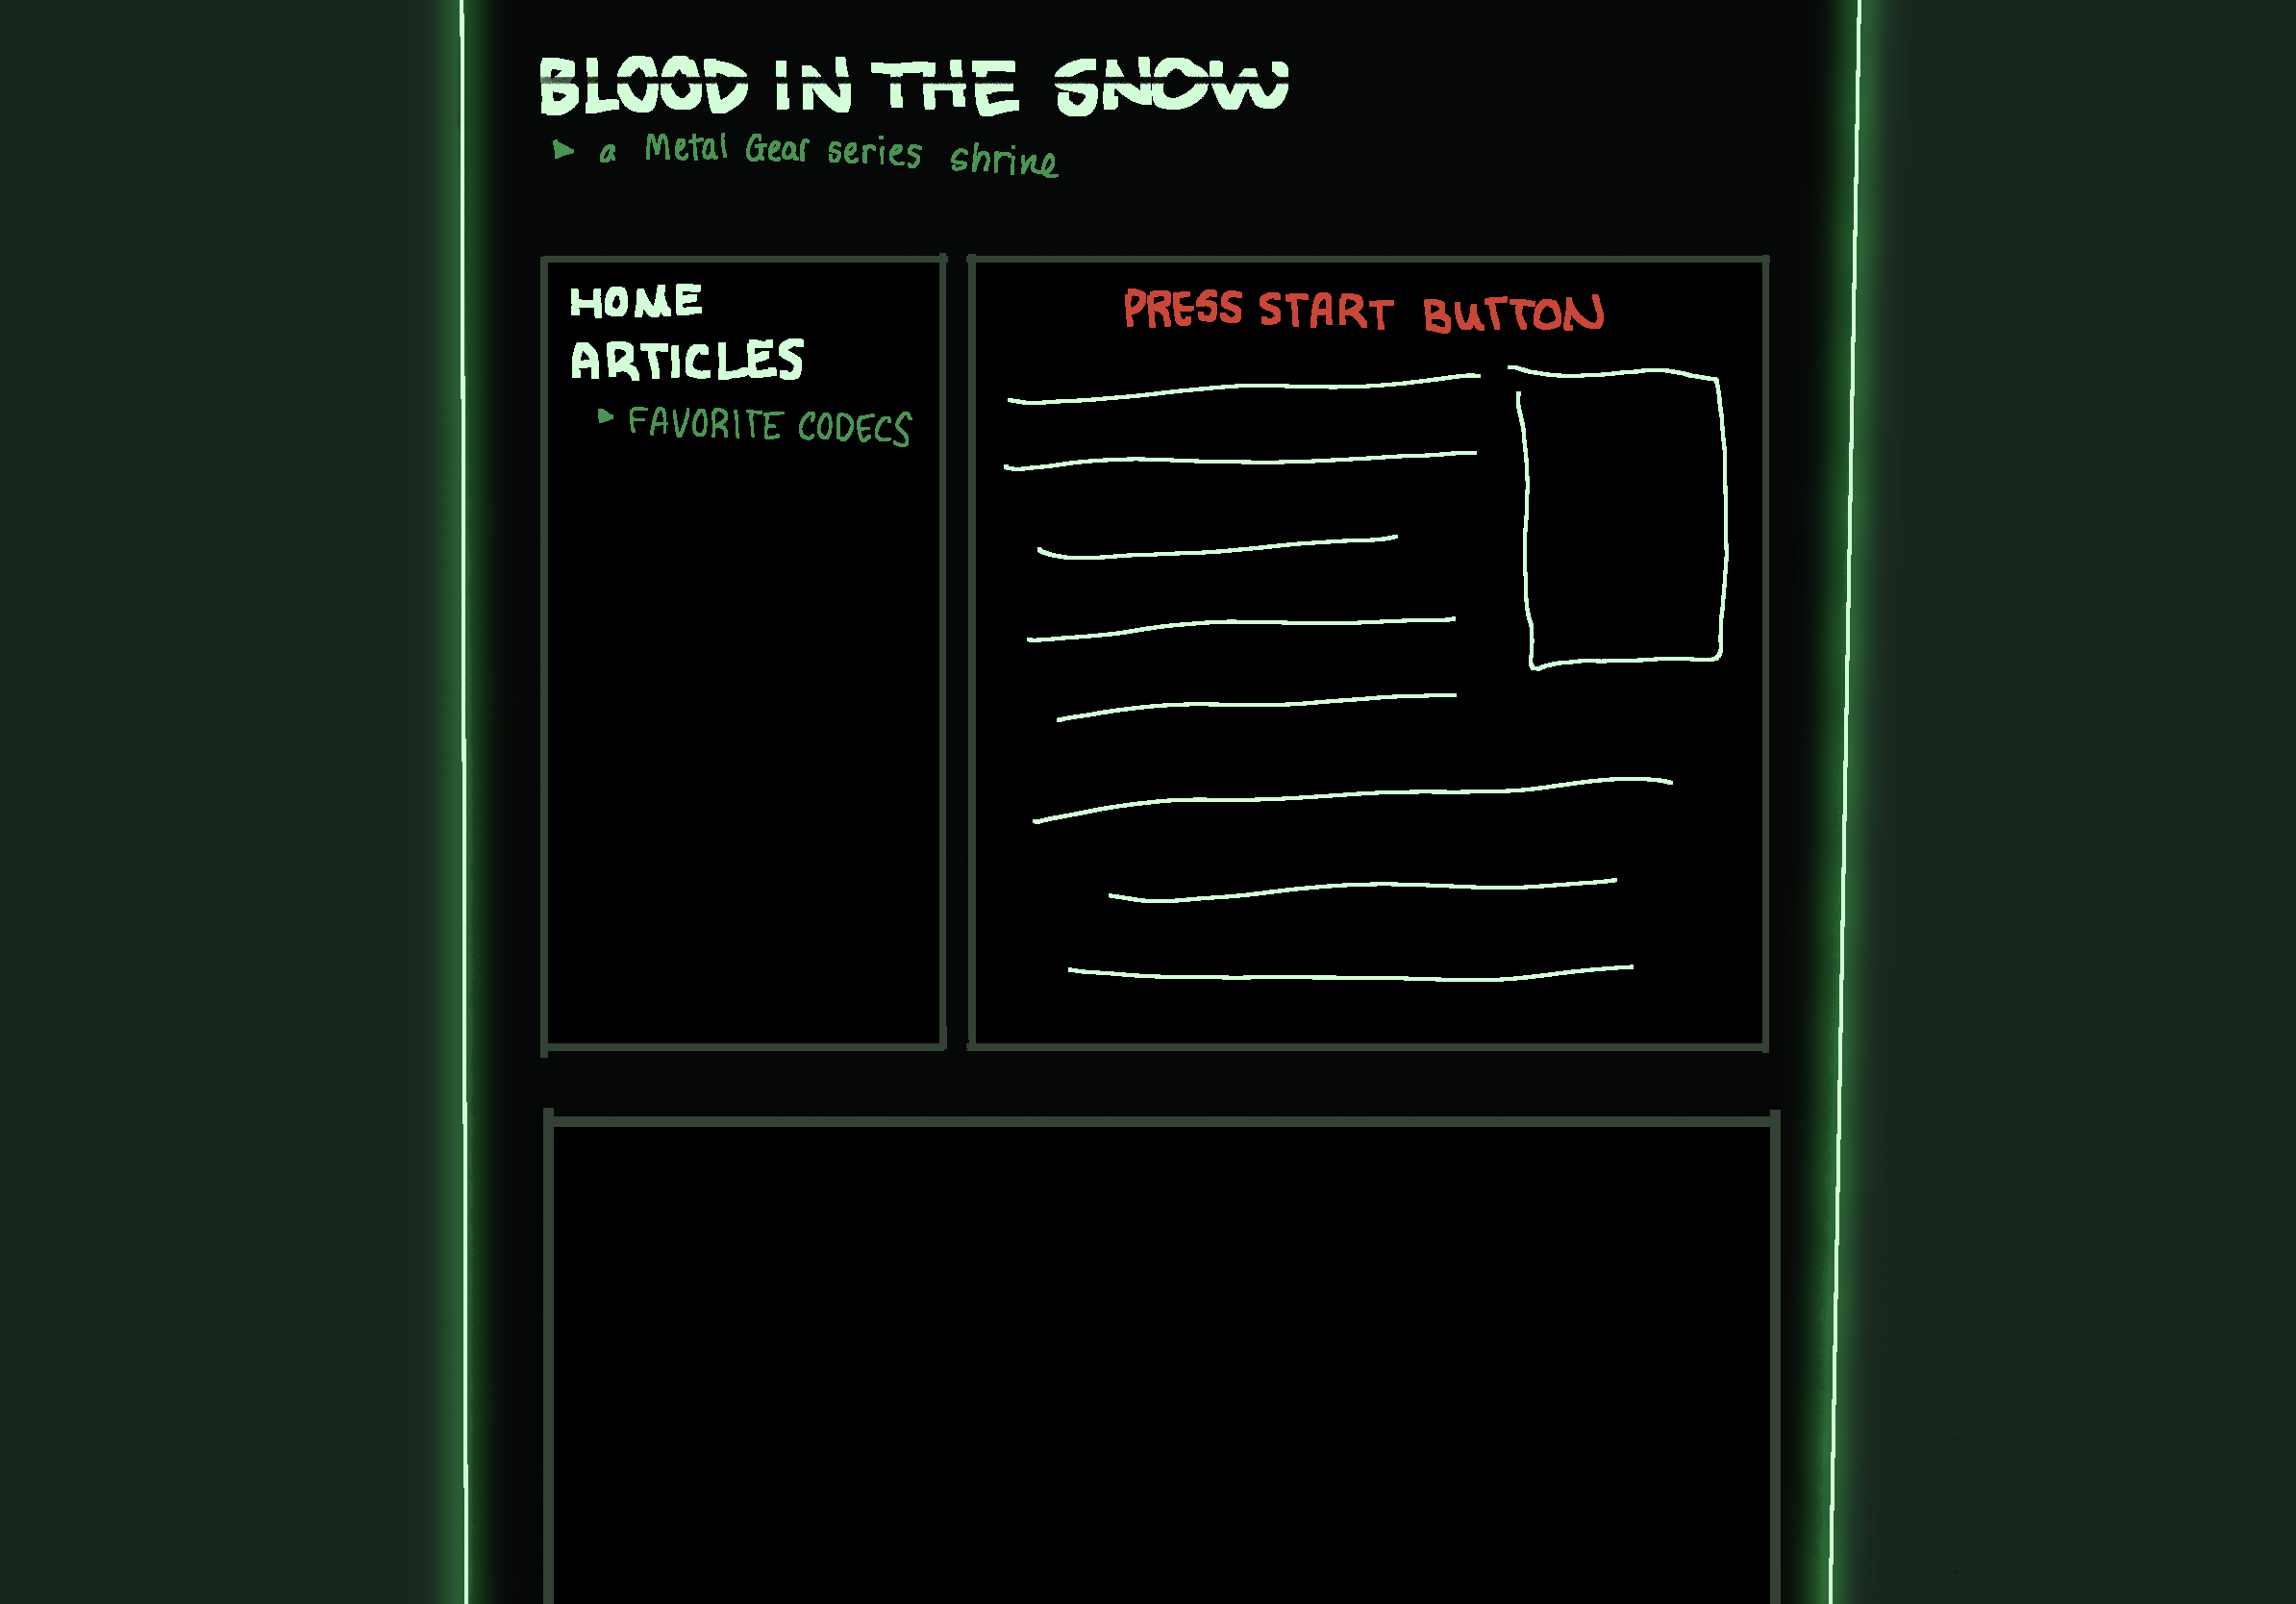 A very rough and unfinished color map for the MGS shrine.